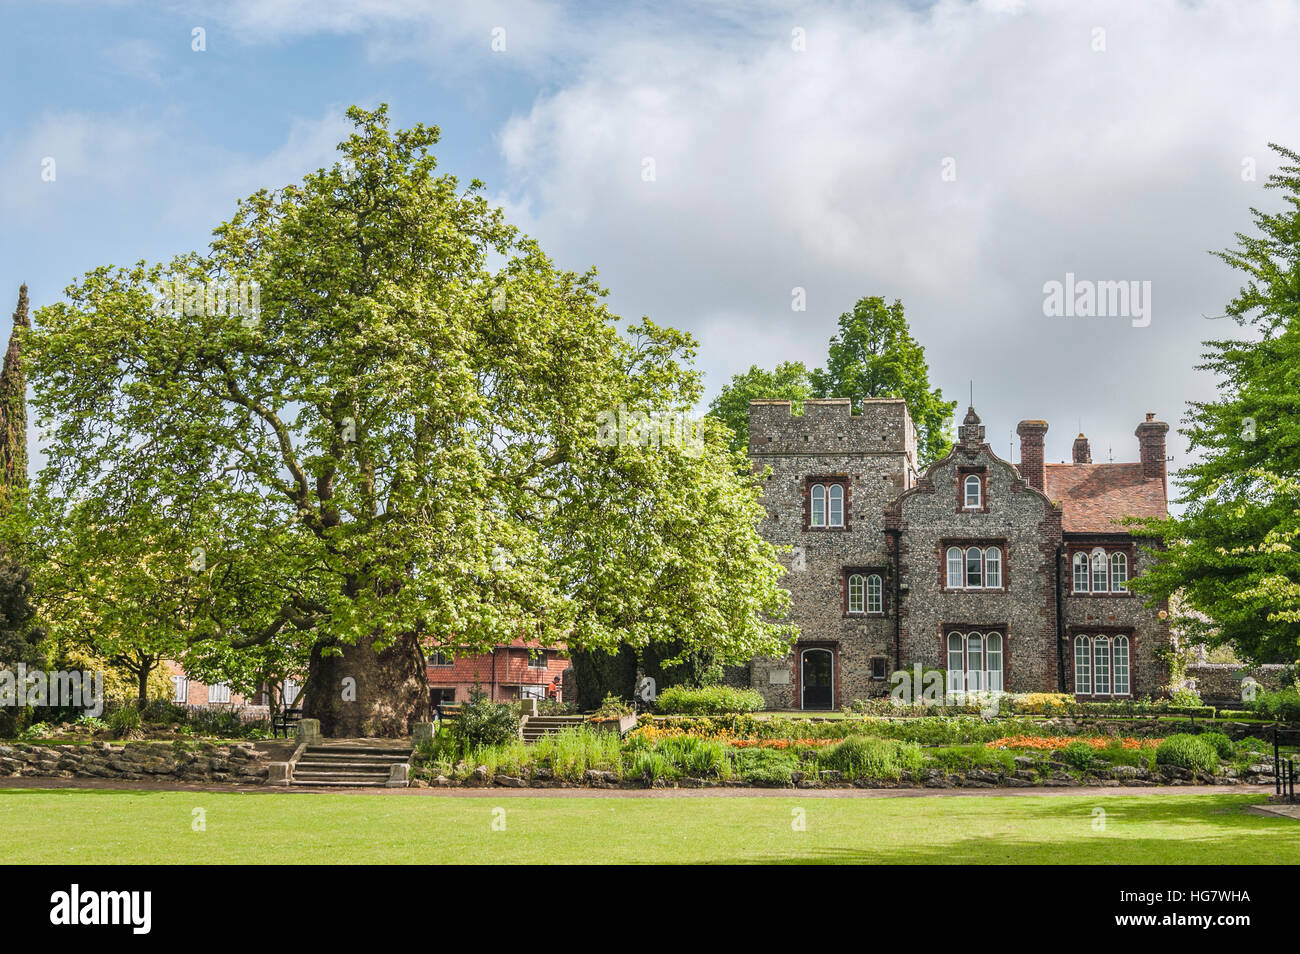 The Tower House at the Westgate Gardens in Canterbury, Kent, England Stock Photo